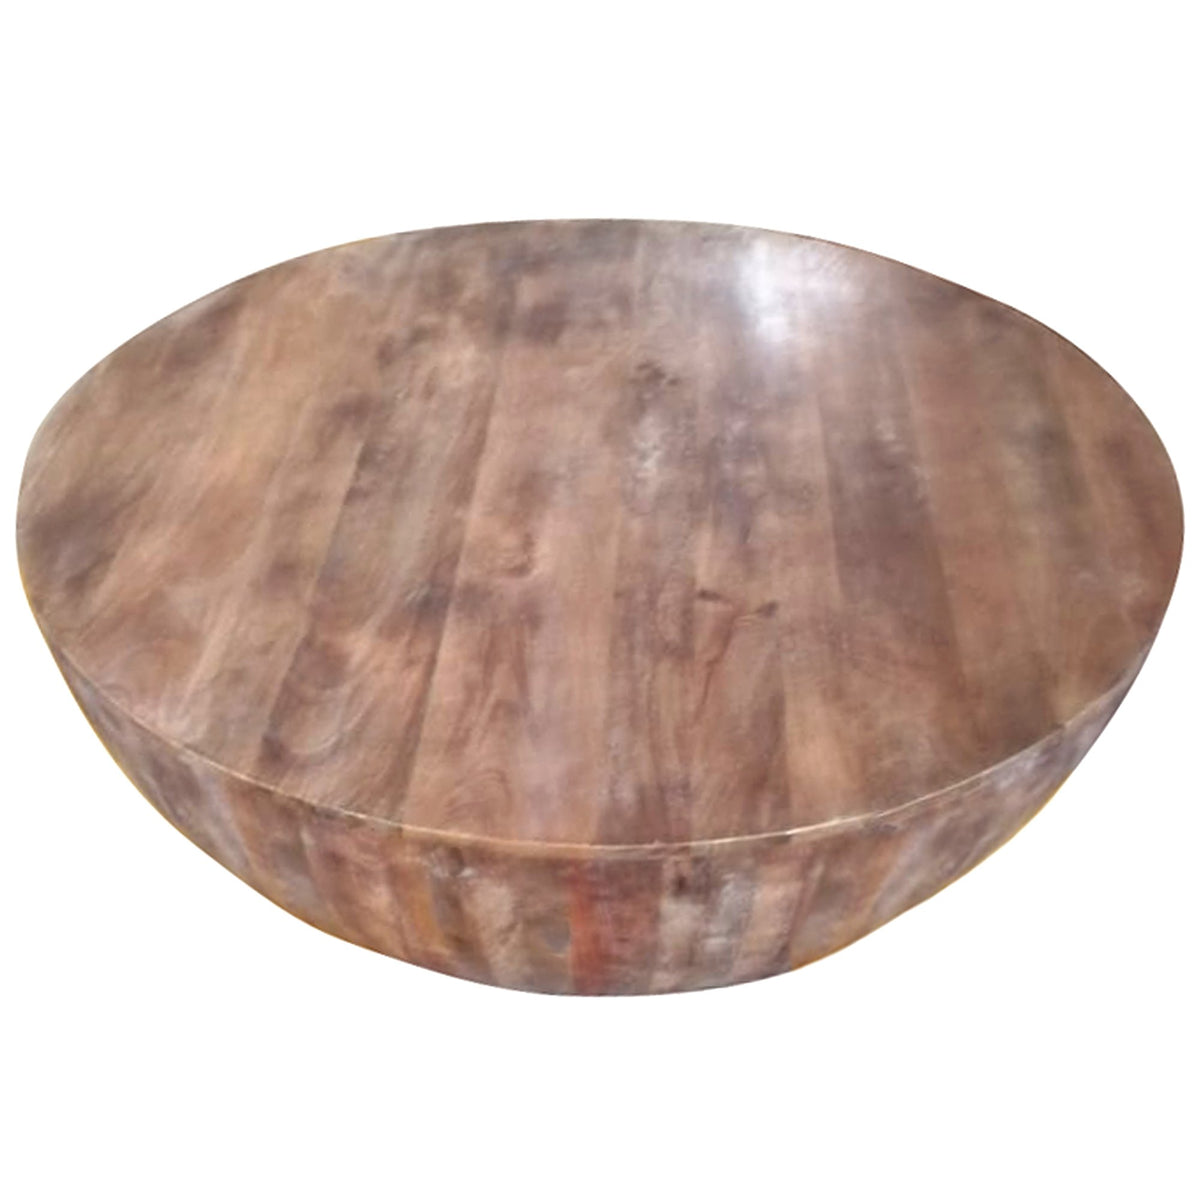 Arthur Handcarved Drum Shape Round Top Mango Wood Distressed Wooden Coffee Table, Brown- UPT-32184